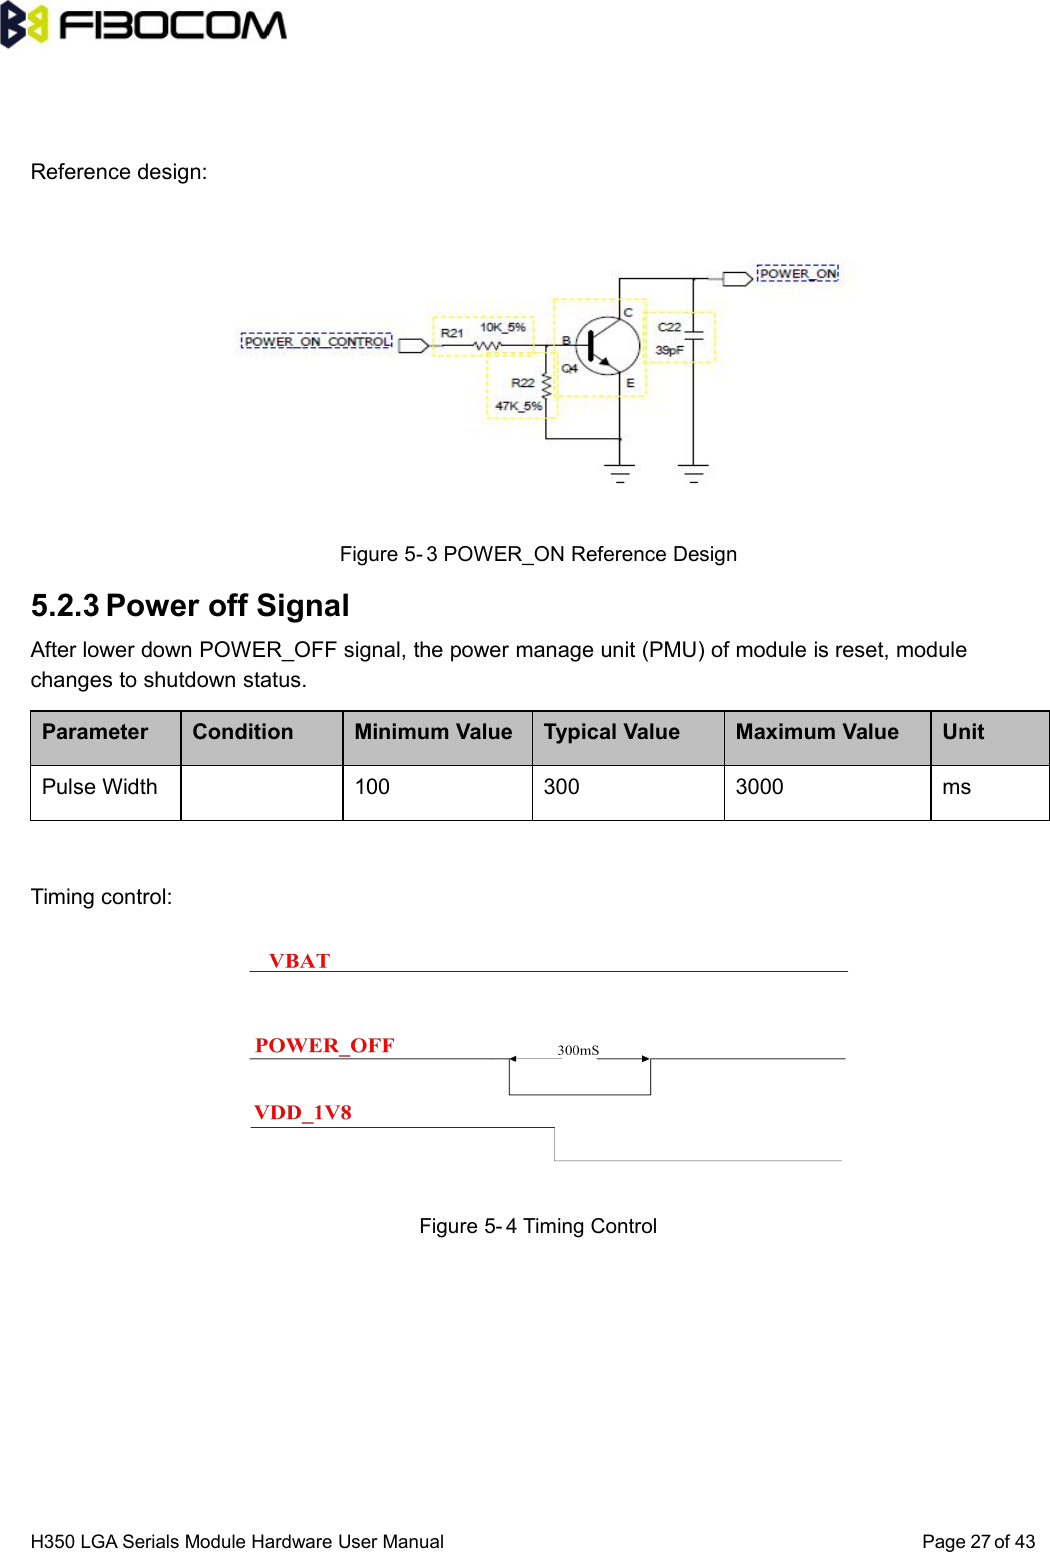 H350 LGA Serials Module Hardware User Manual Page of 4327Reference design:Figure 5- 3 POWER_ON Reference Design5.2.3 Power off SignalAfter lower down POWER_OFF signal, the power manage unit (PMU) of module is reset, modulechanges to shutdown status.Parameter Condition Minimum Value Typical Value Maximum Value UnitPulse Width 100 300 3000 msTiming control:Figure 5- 4 Timing Control